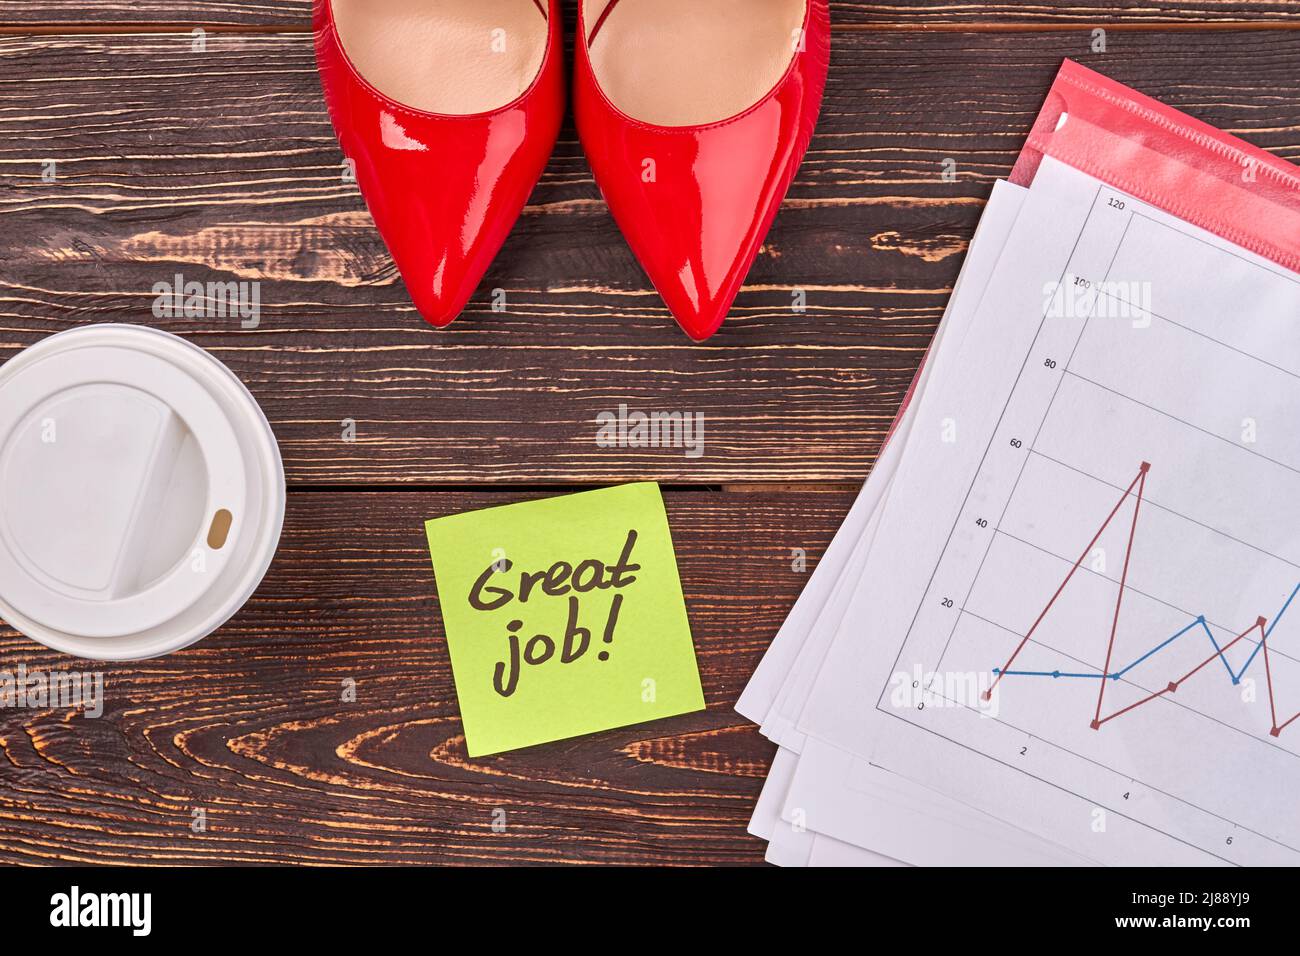 Top view flat lay red shoes and plastic cup. Sticky note with great job handwriting on brown wood. Stock Photo